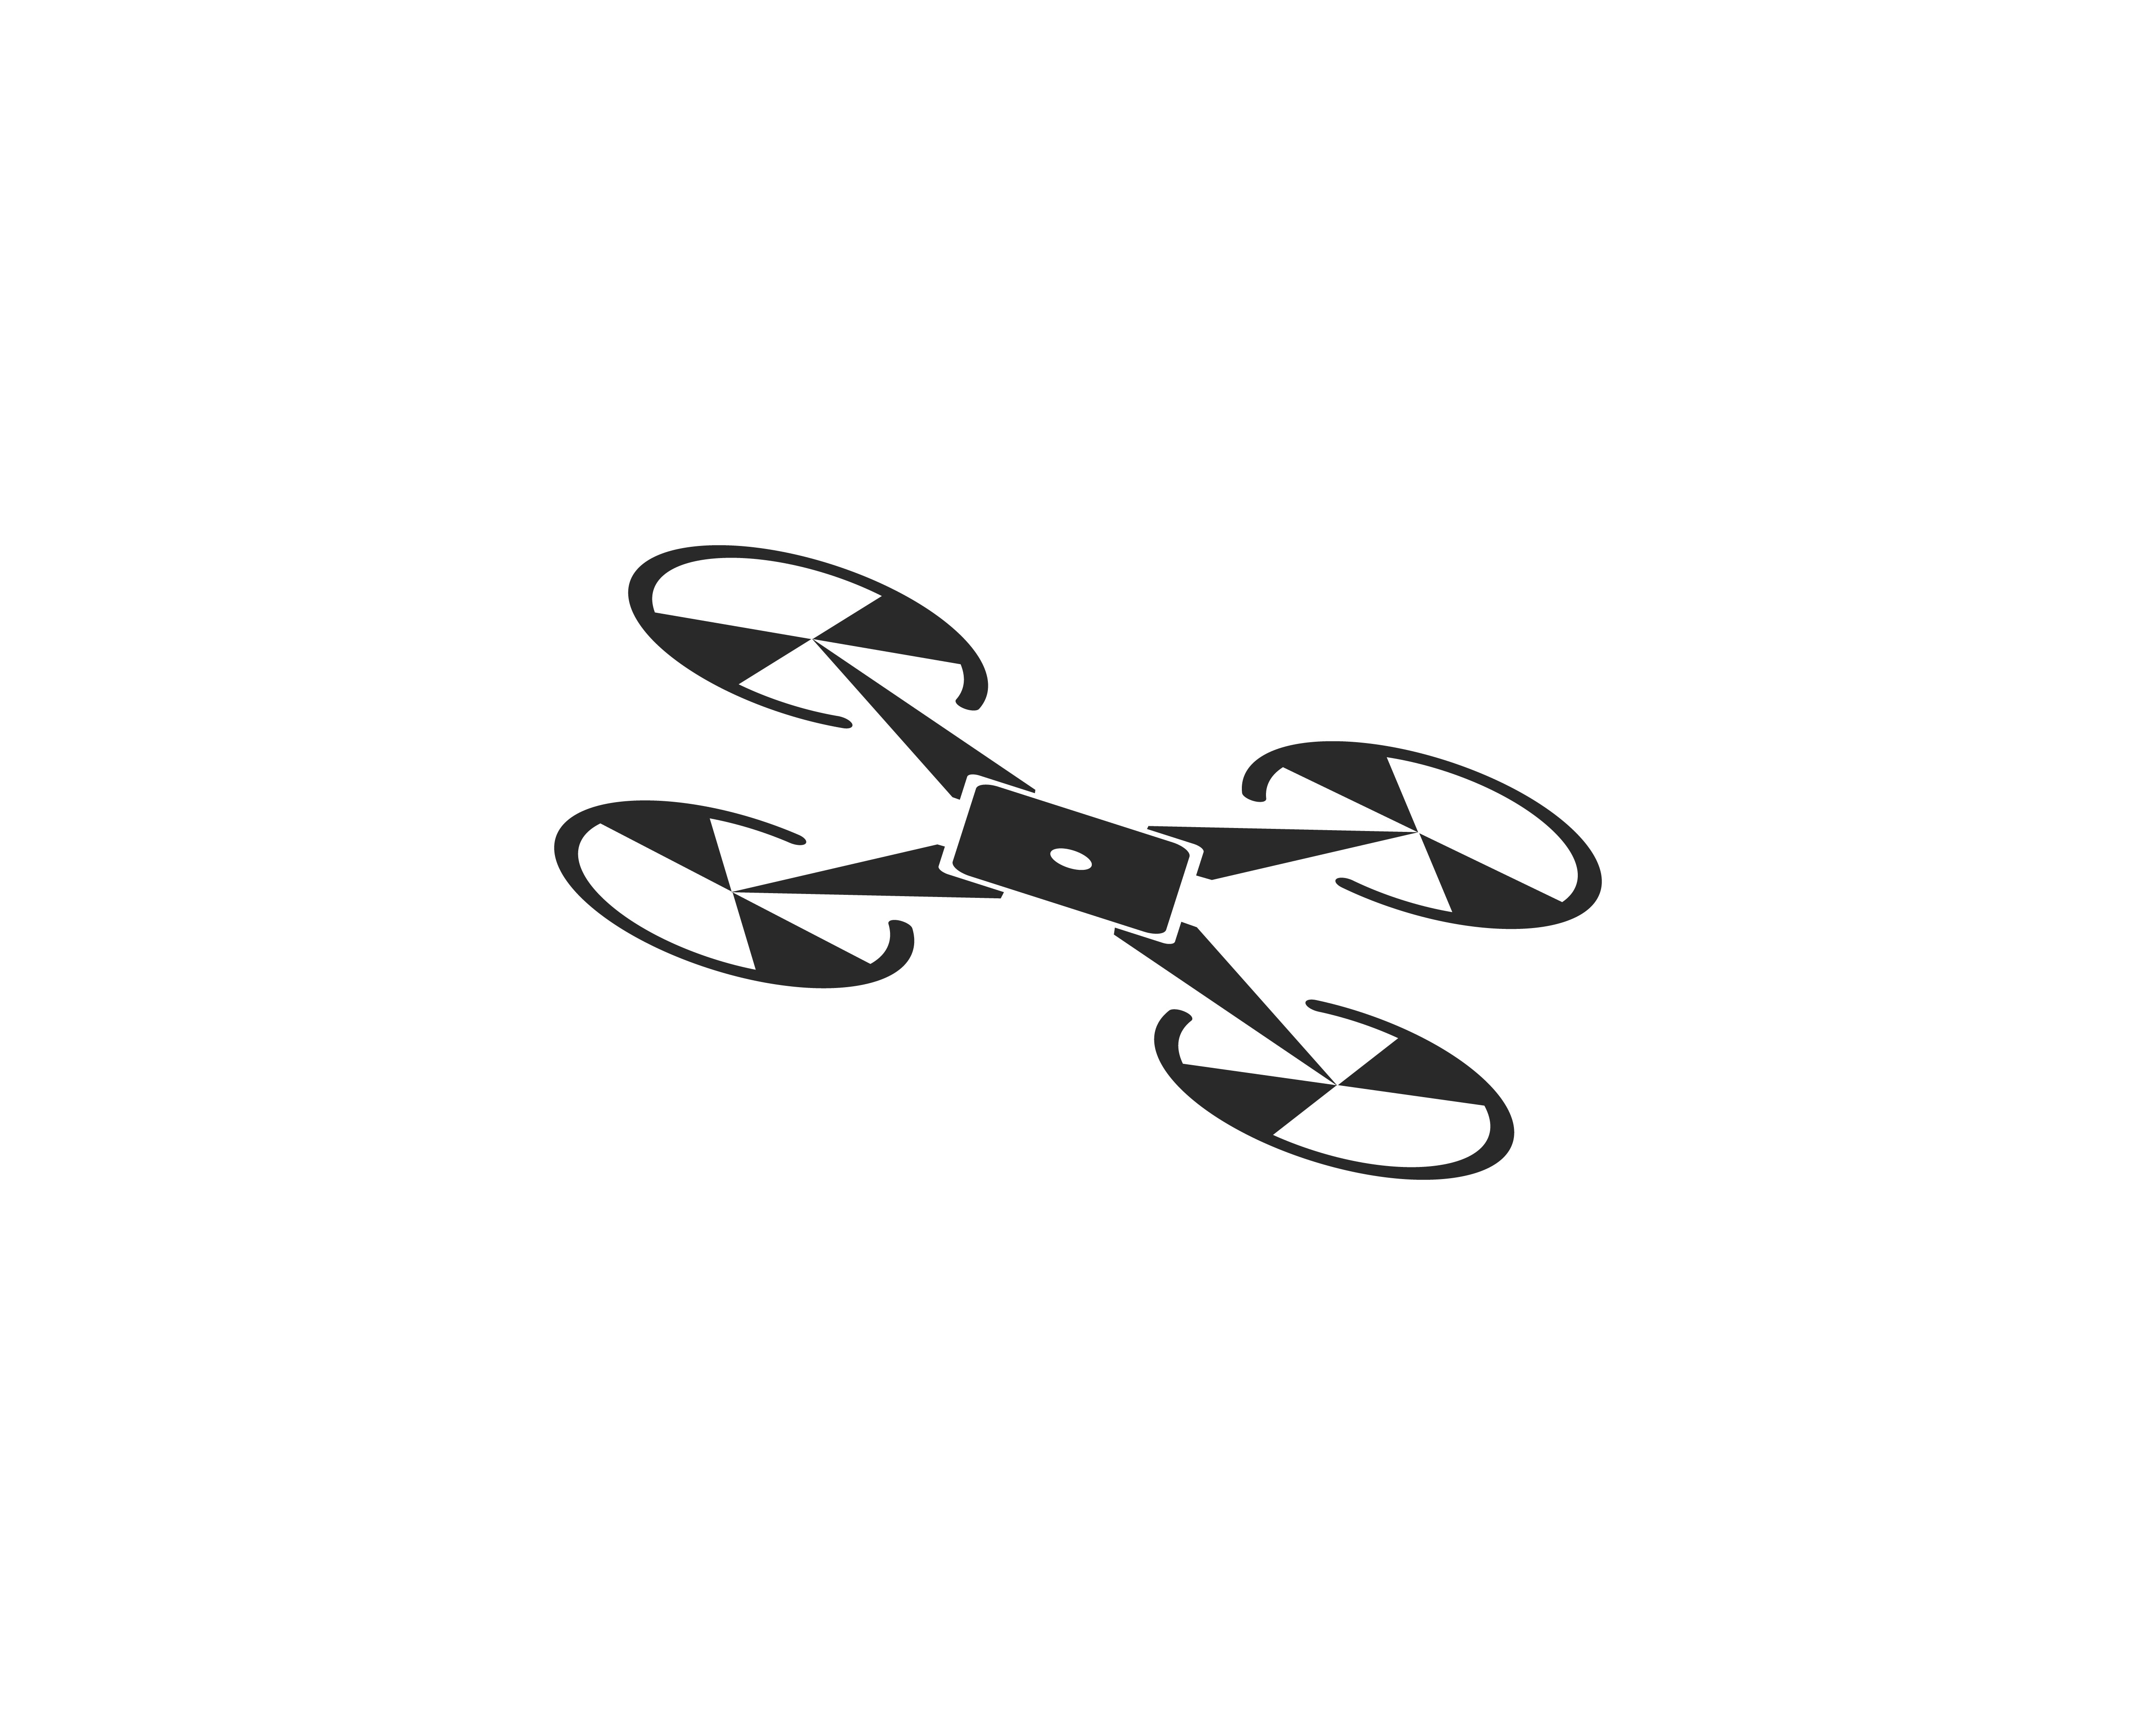 Drone logo and symbol vector illustration 623601 - Download Free